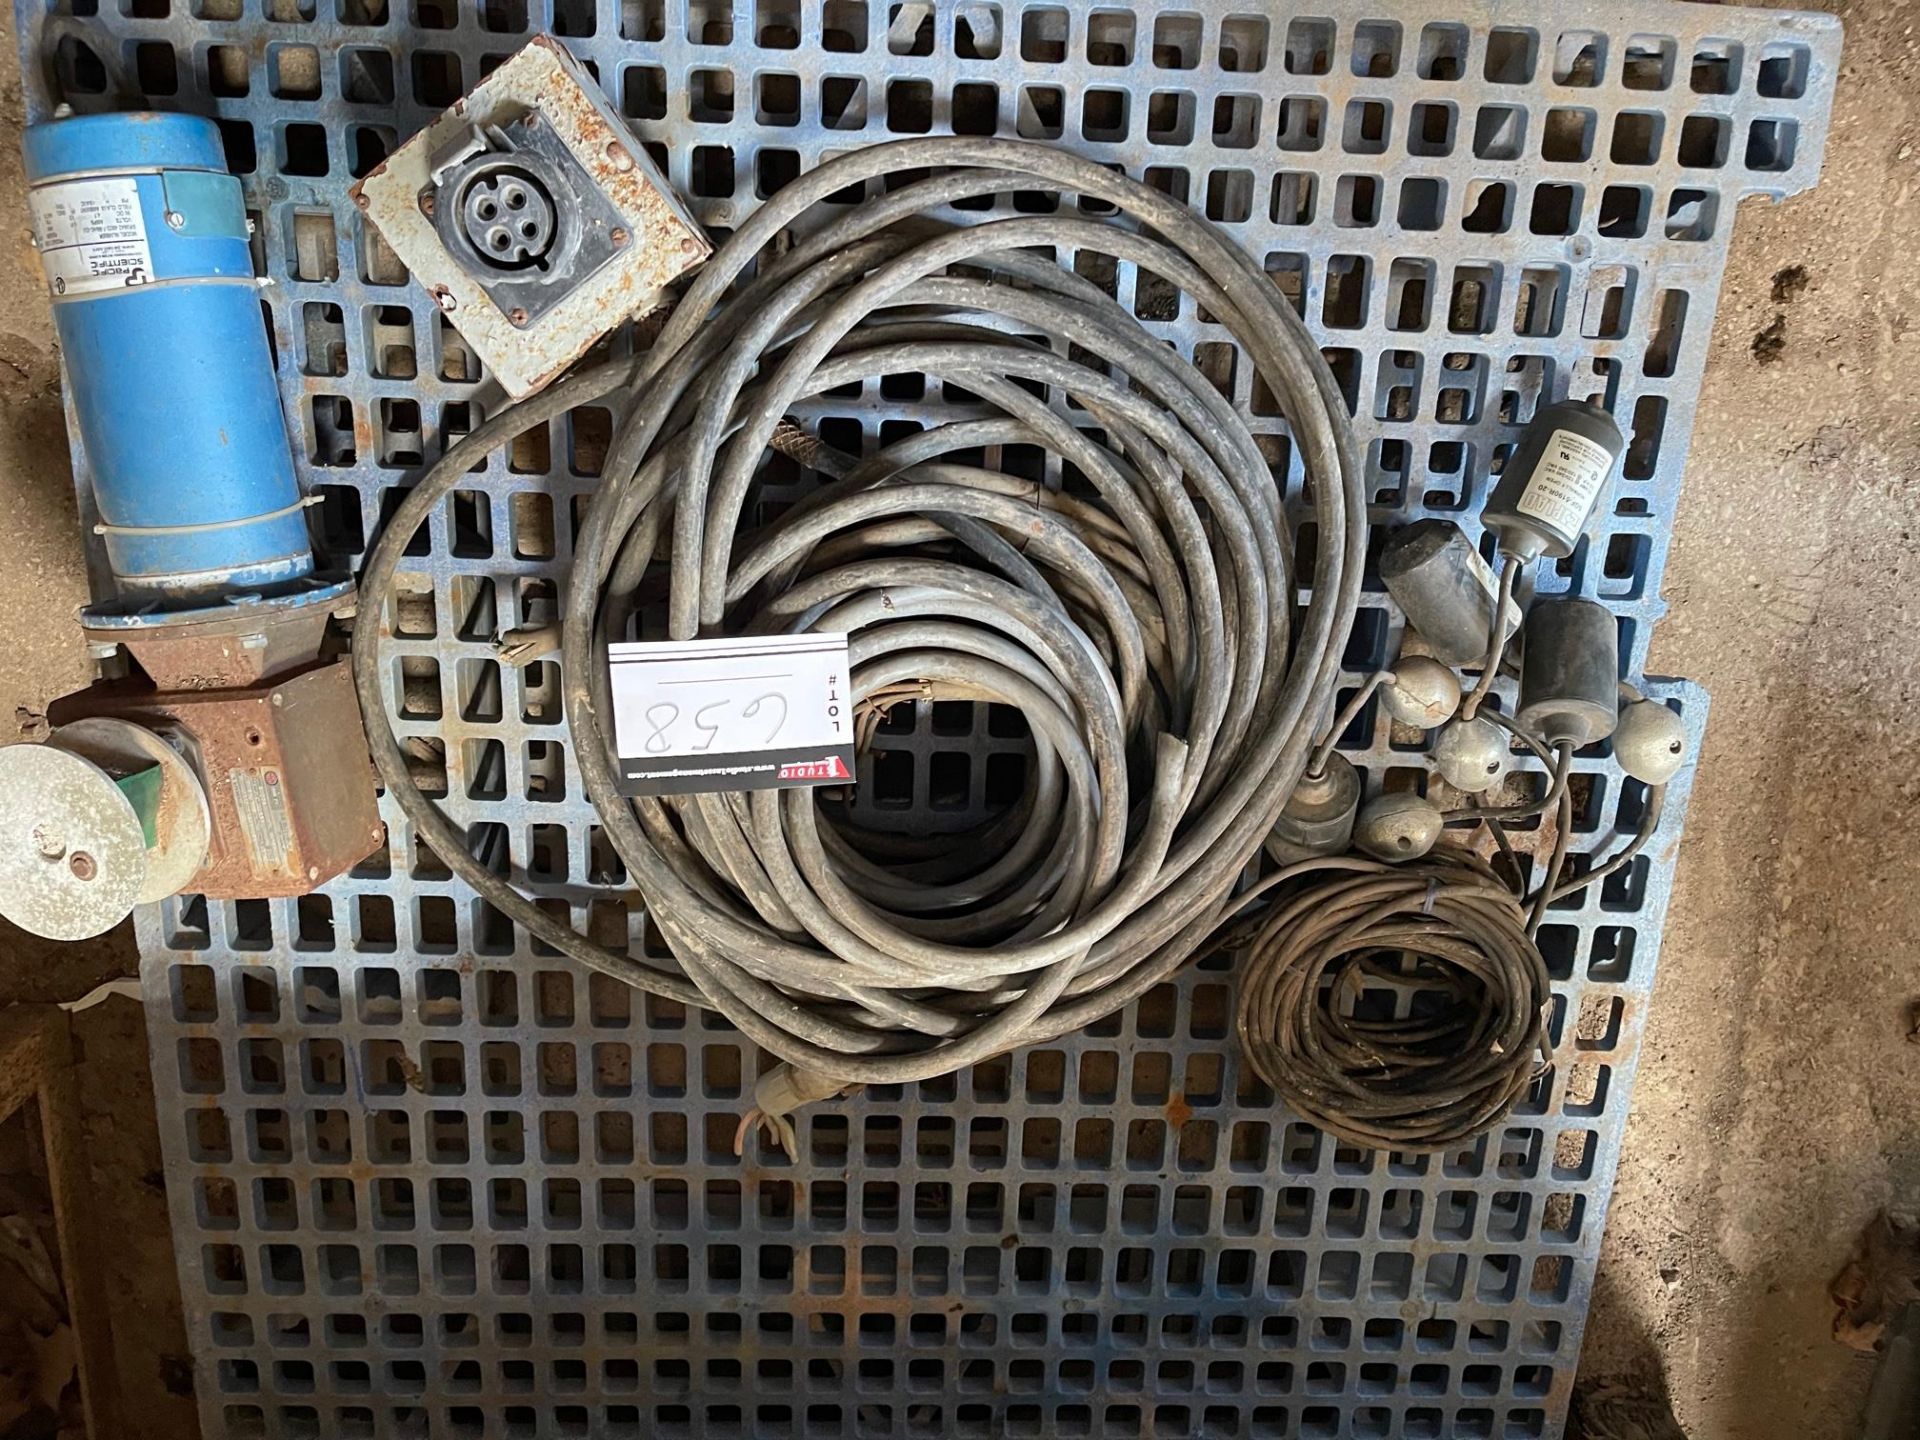 LOT OF WIRES, PLUGS, SUBMERSIBLE PUMP FLOATS TIMES FOUR, DC MOTOR AND GEARBOX 60:1 RATIO